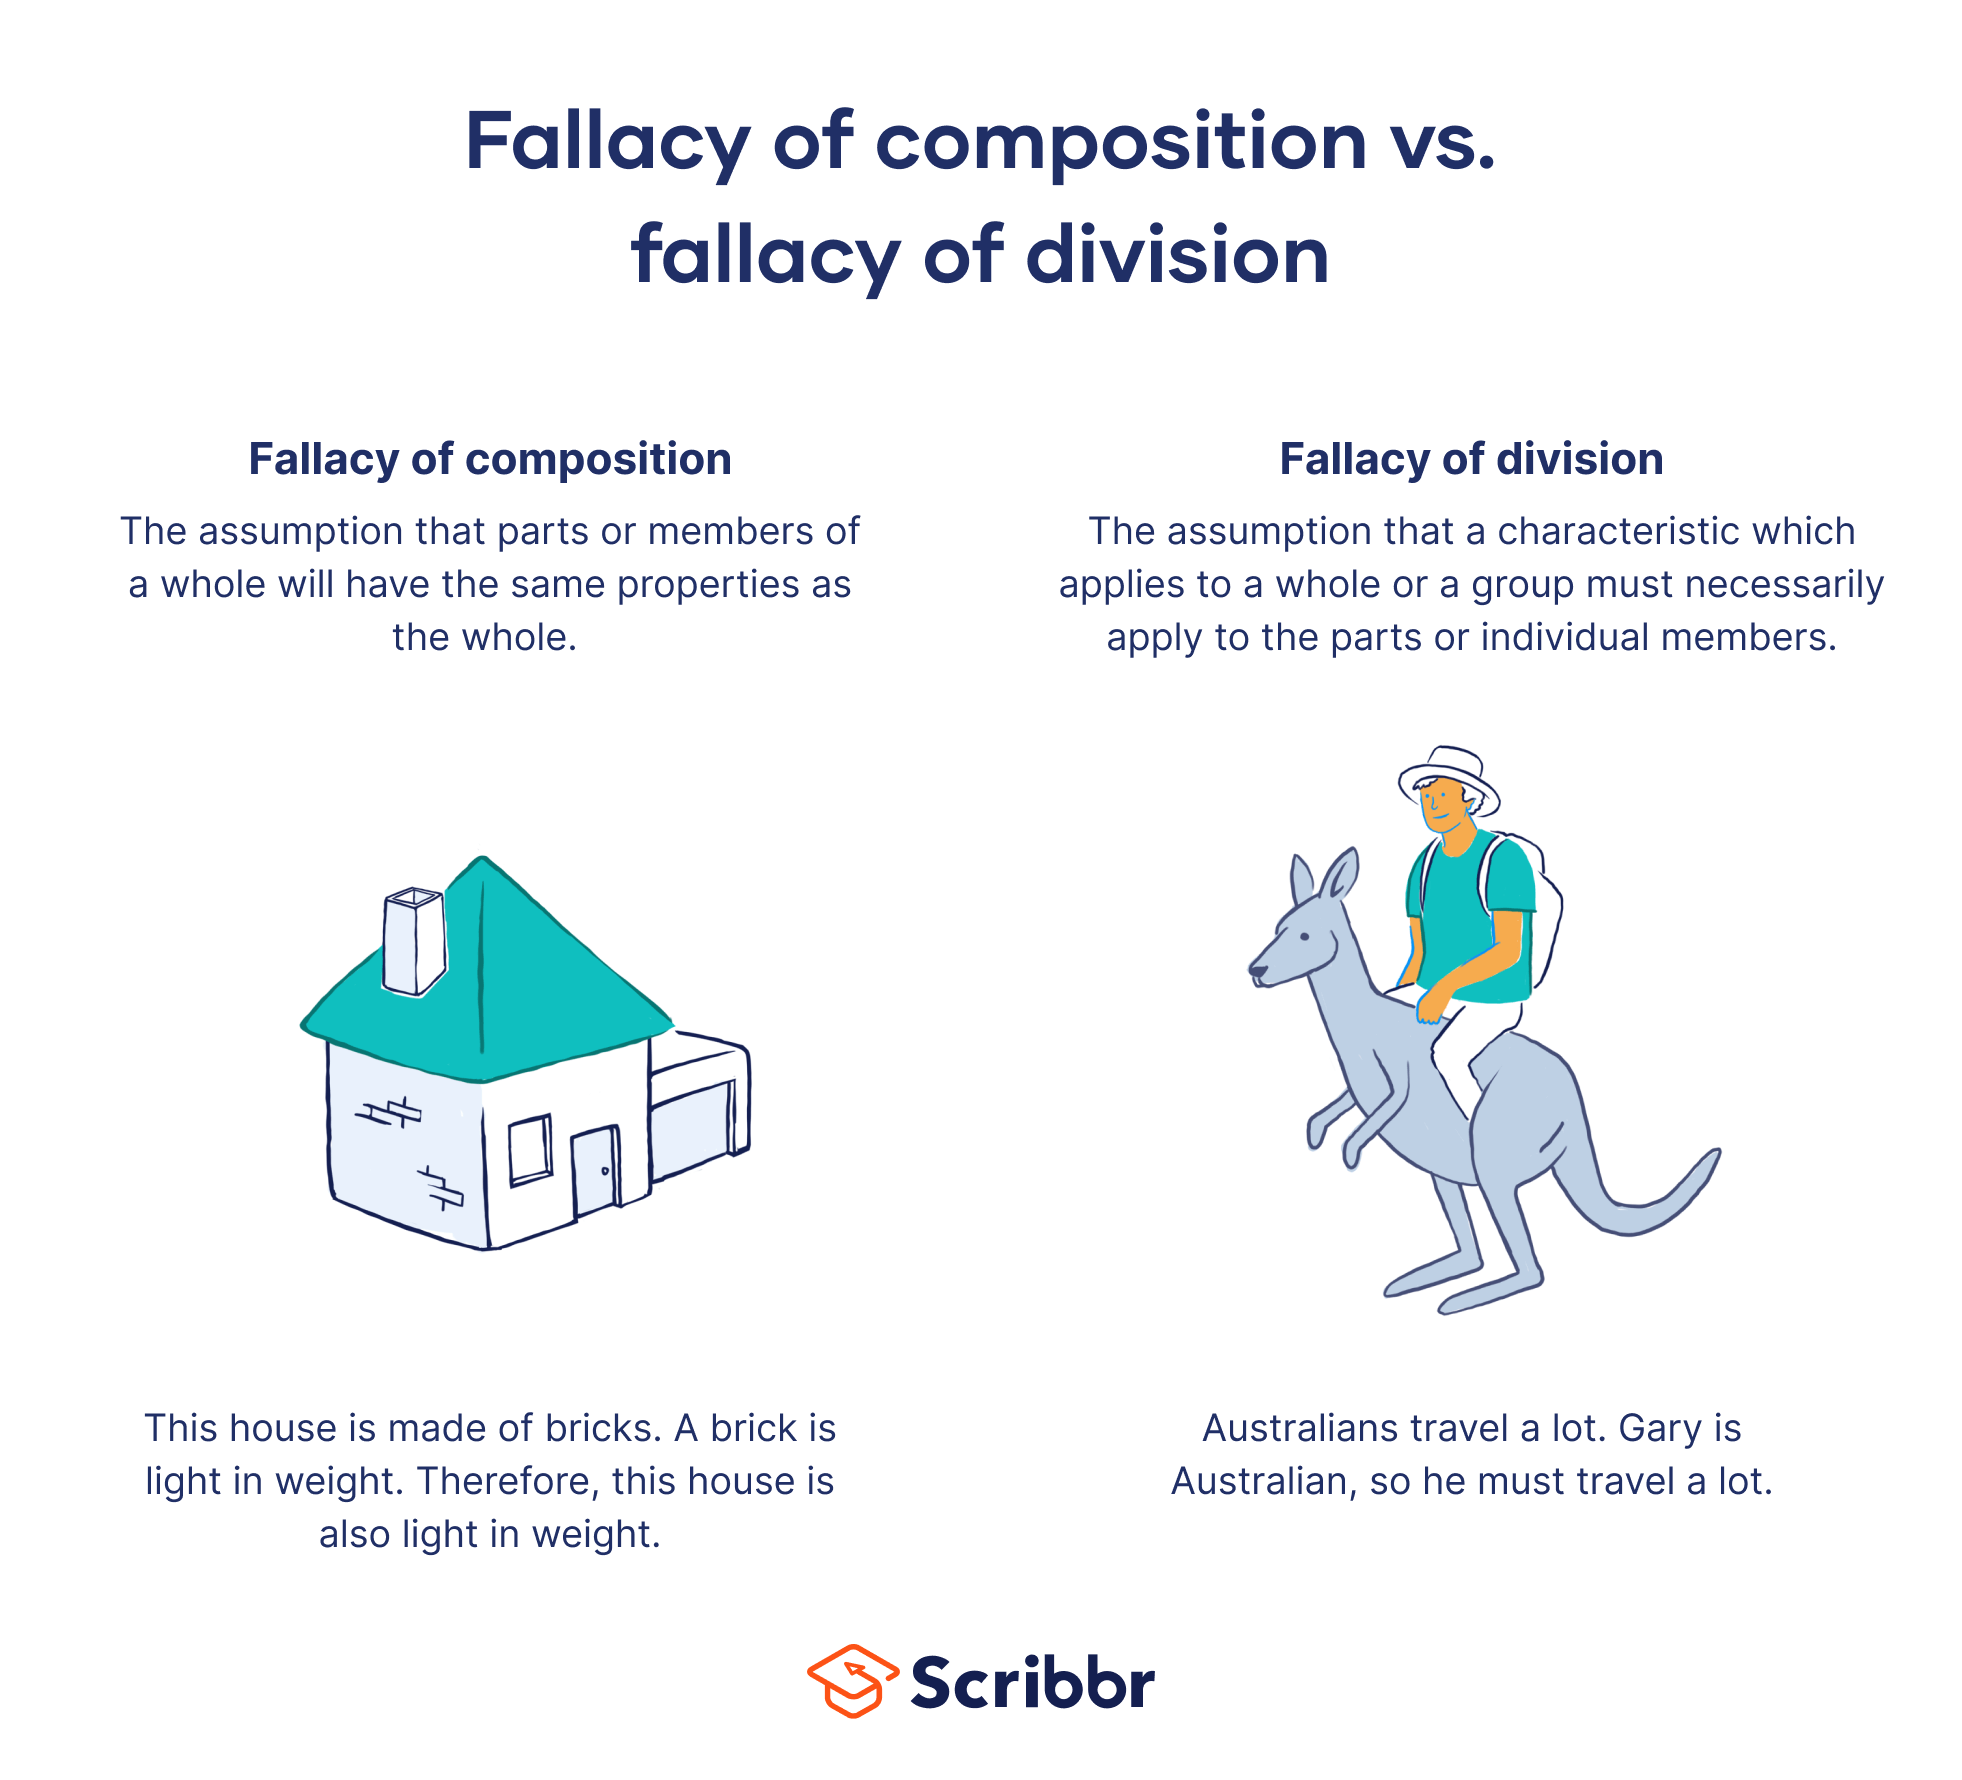 Fallacy of Composition